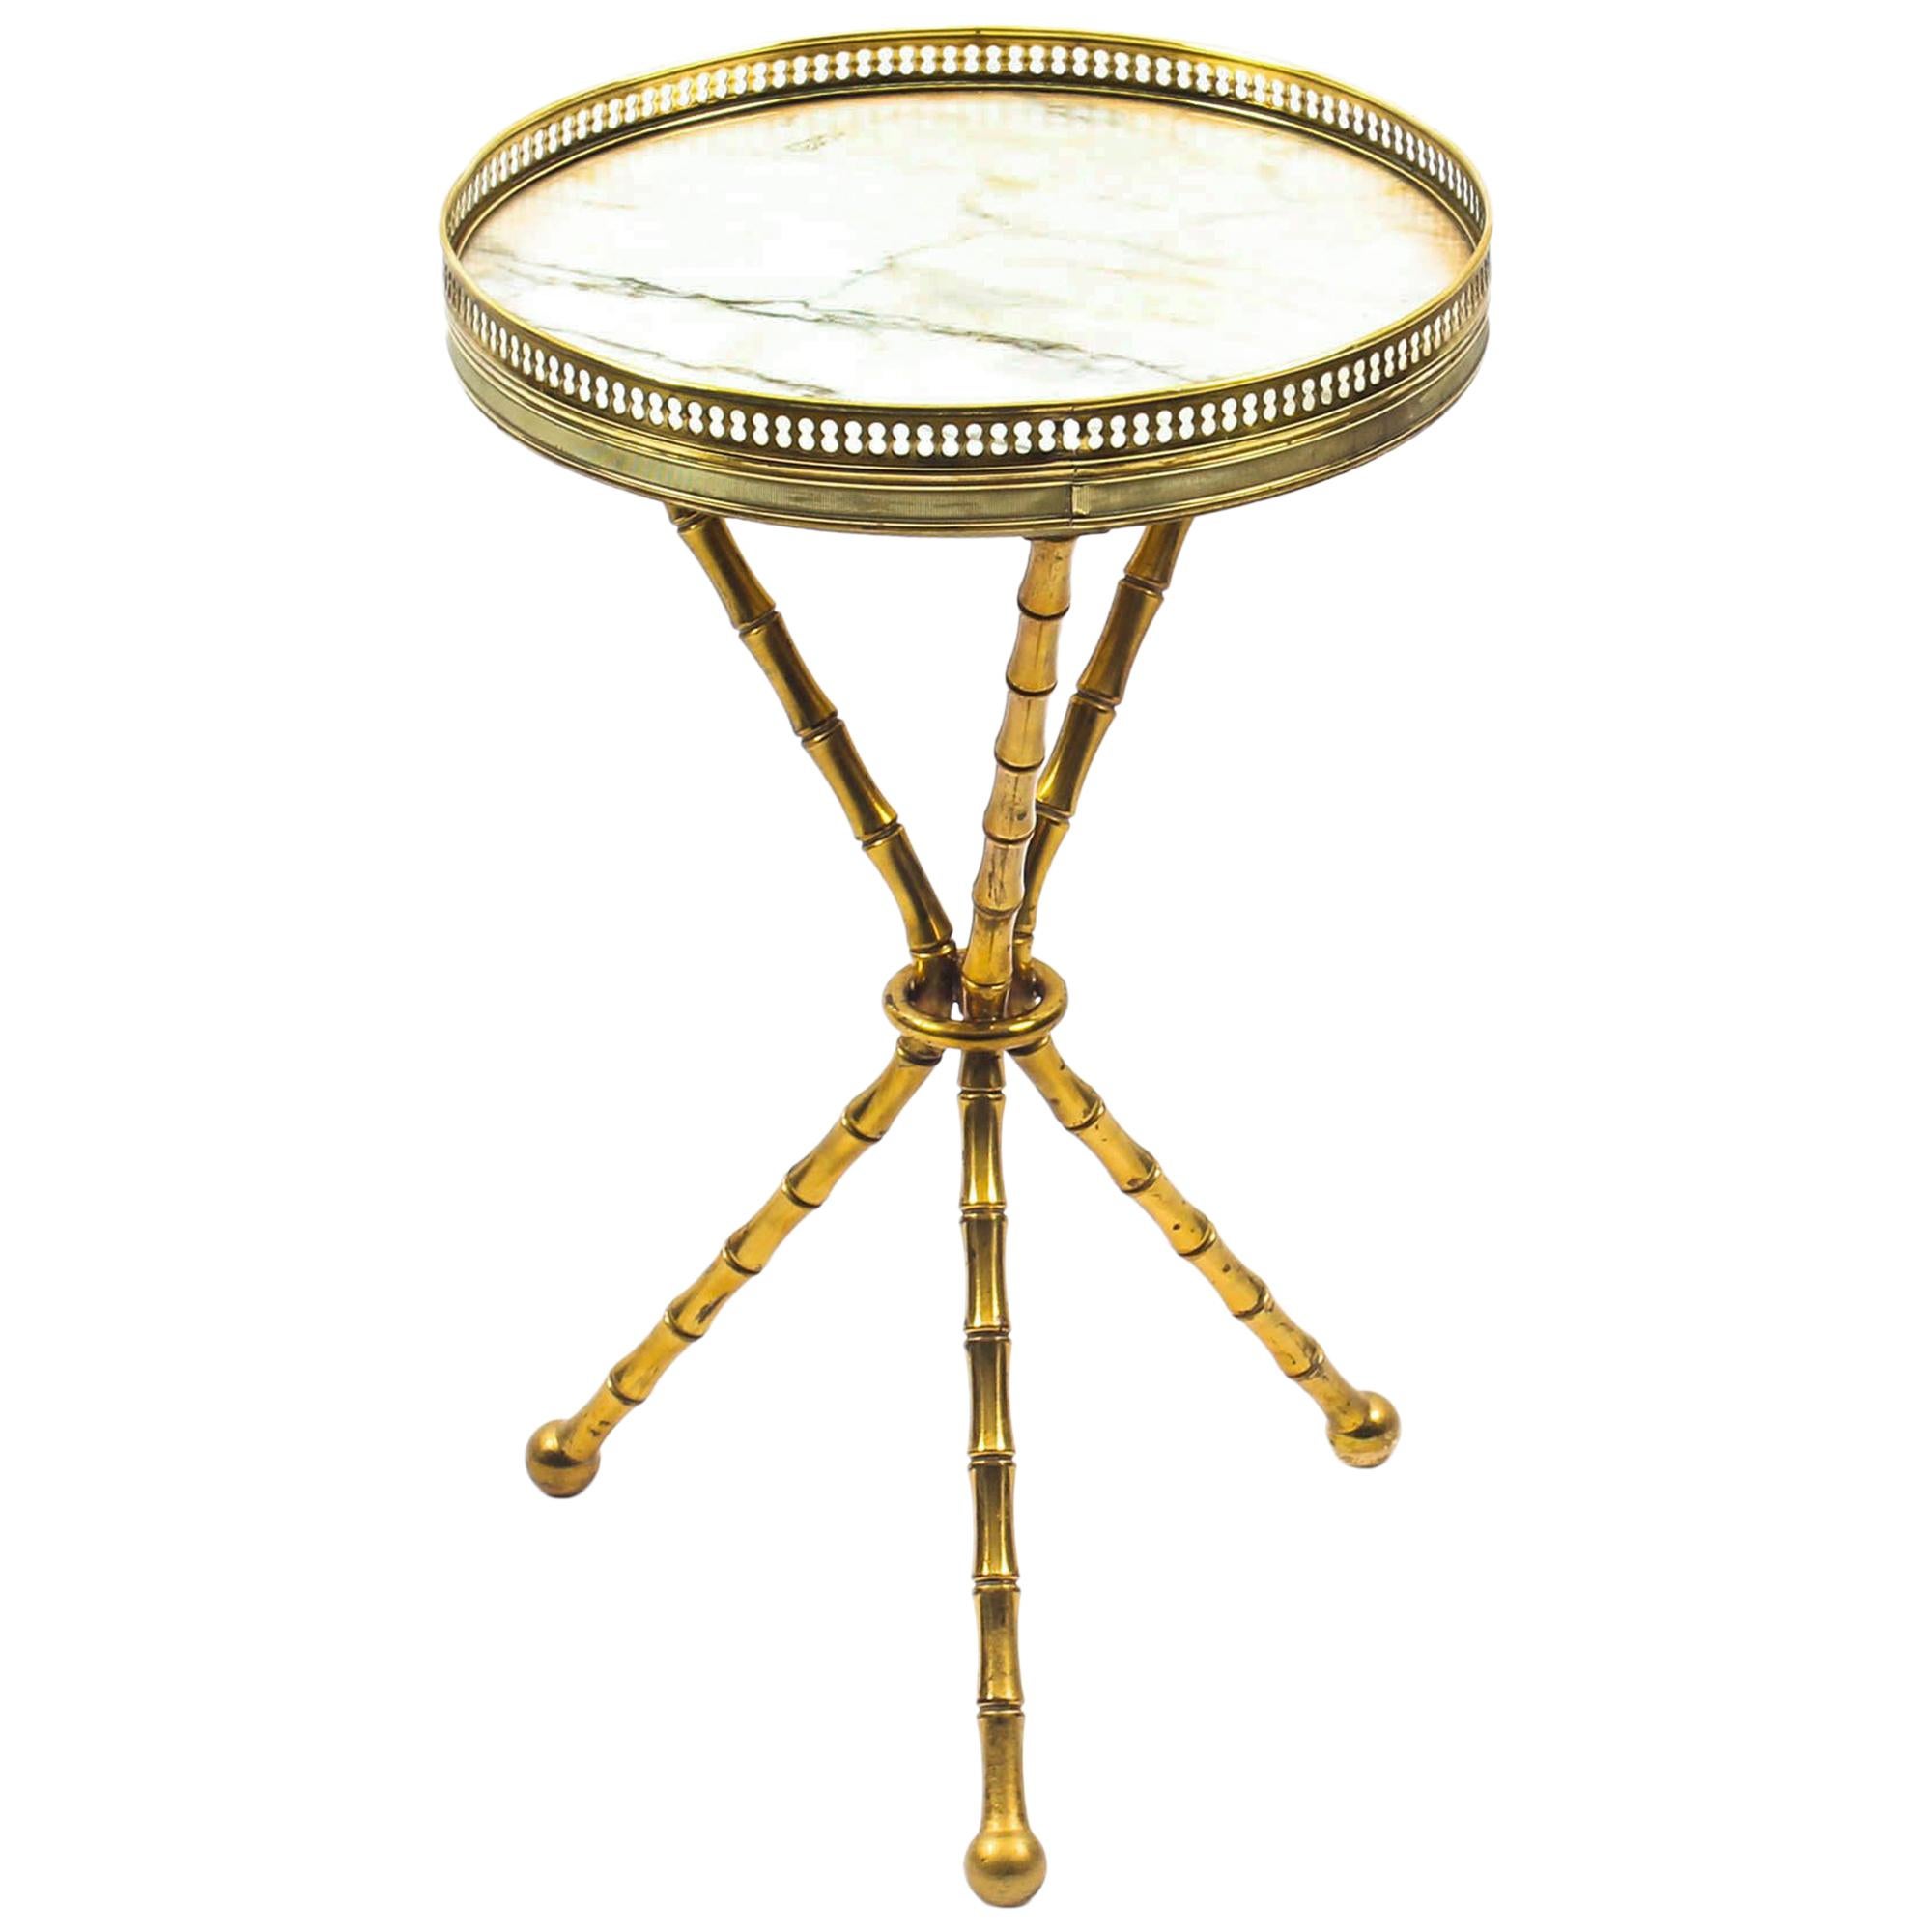 Antique French Ormolu Occasional Table Carrara Marble Top, 19th Century